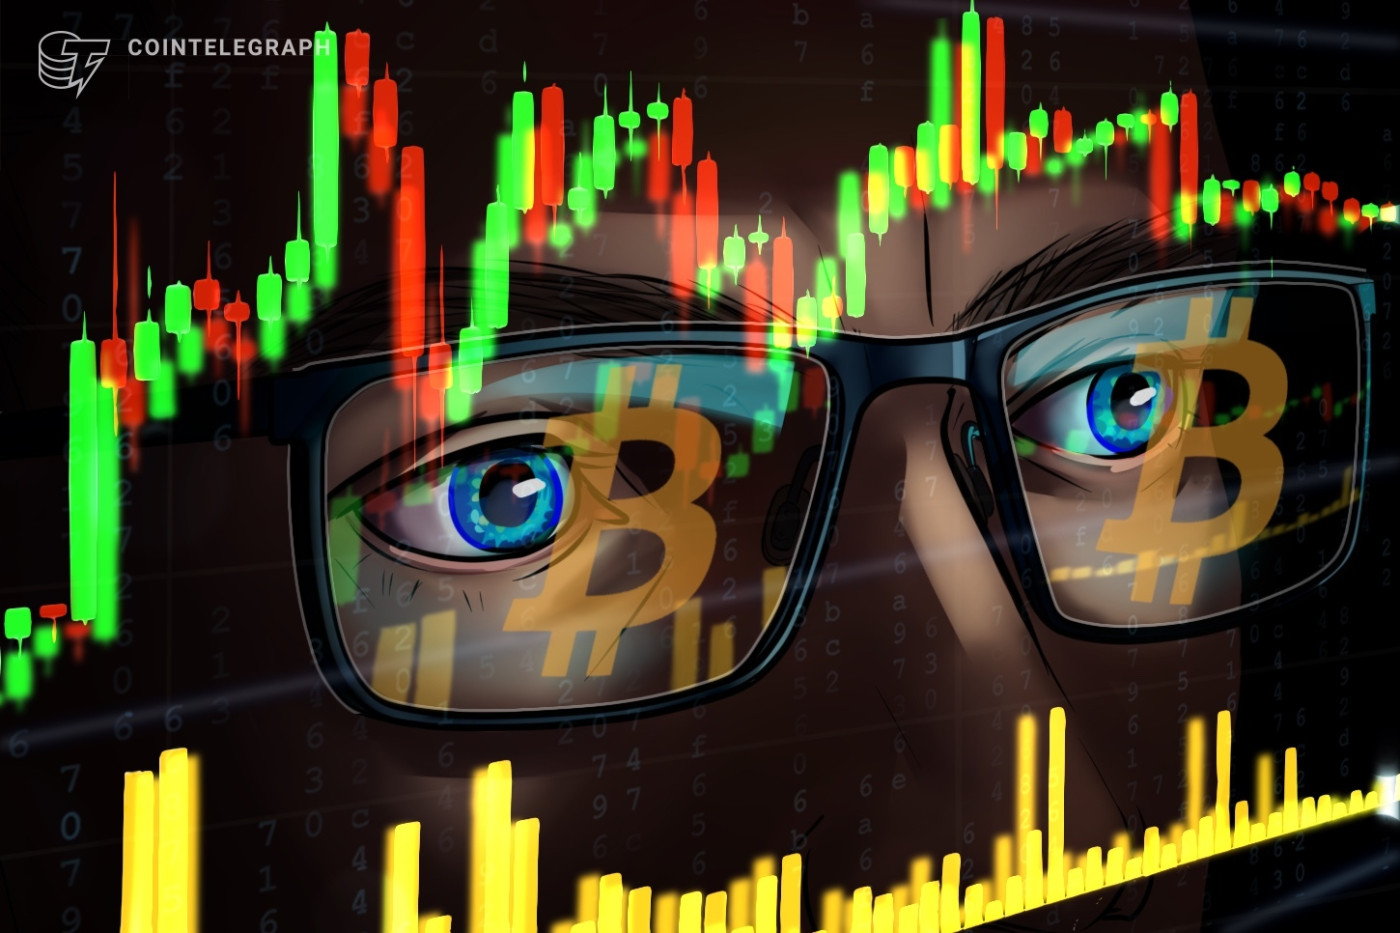 Bitcoin traders see $48K BTC price before ETF 'sell the news' event